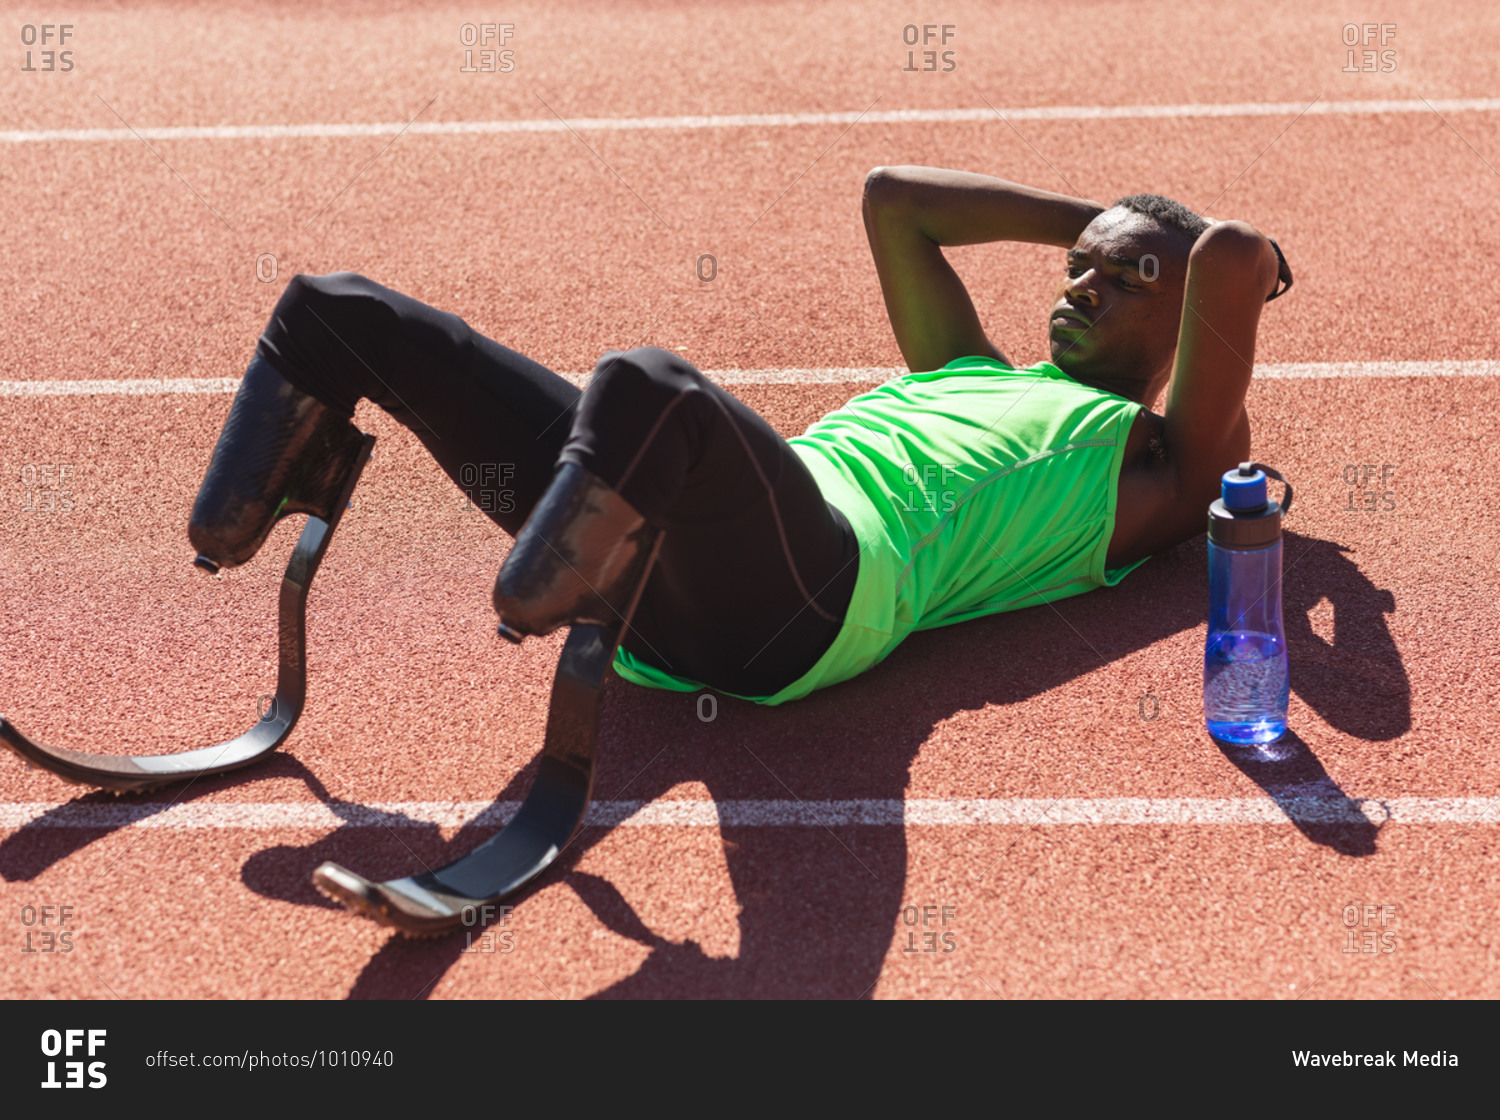 Fit, mixed race disabled male athlete at an outdoor sports stadium, lying on race track after race with water bottle wearing running blades. Disability athletics sport training.